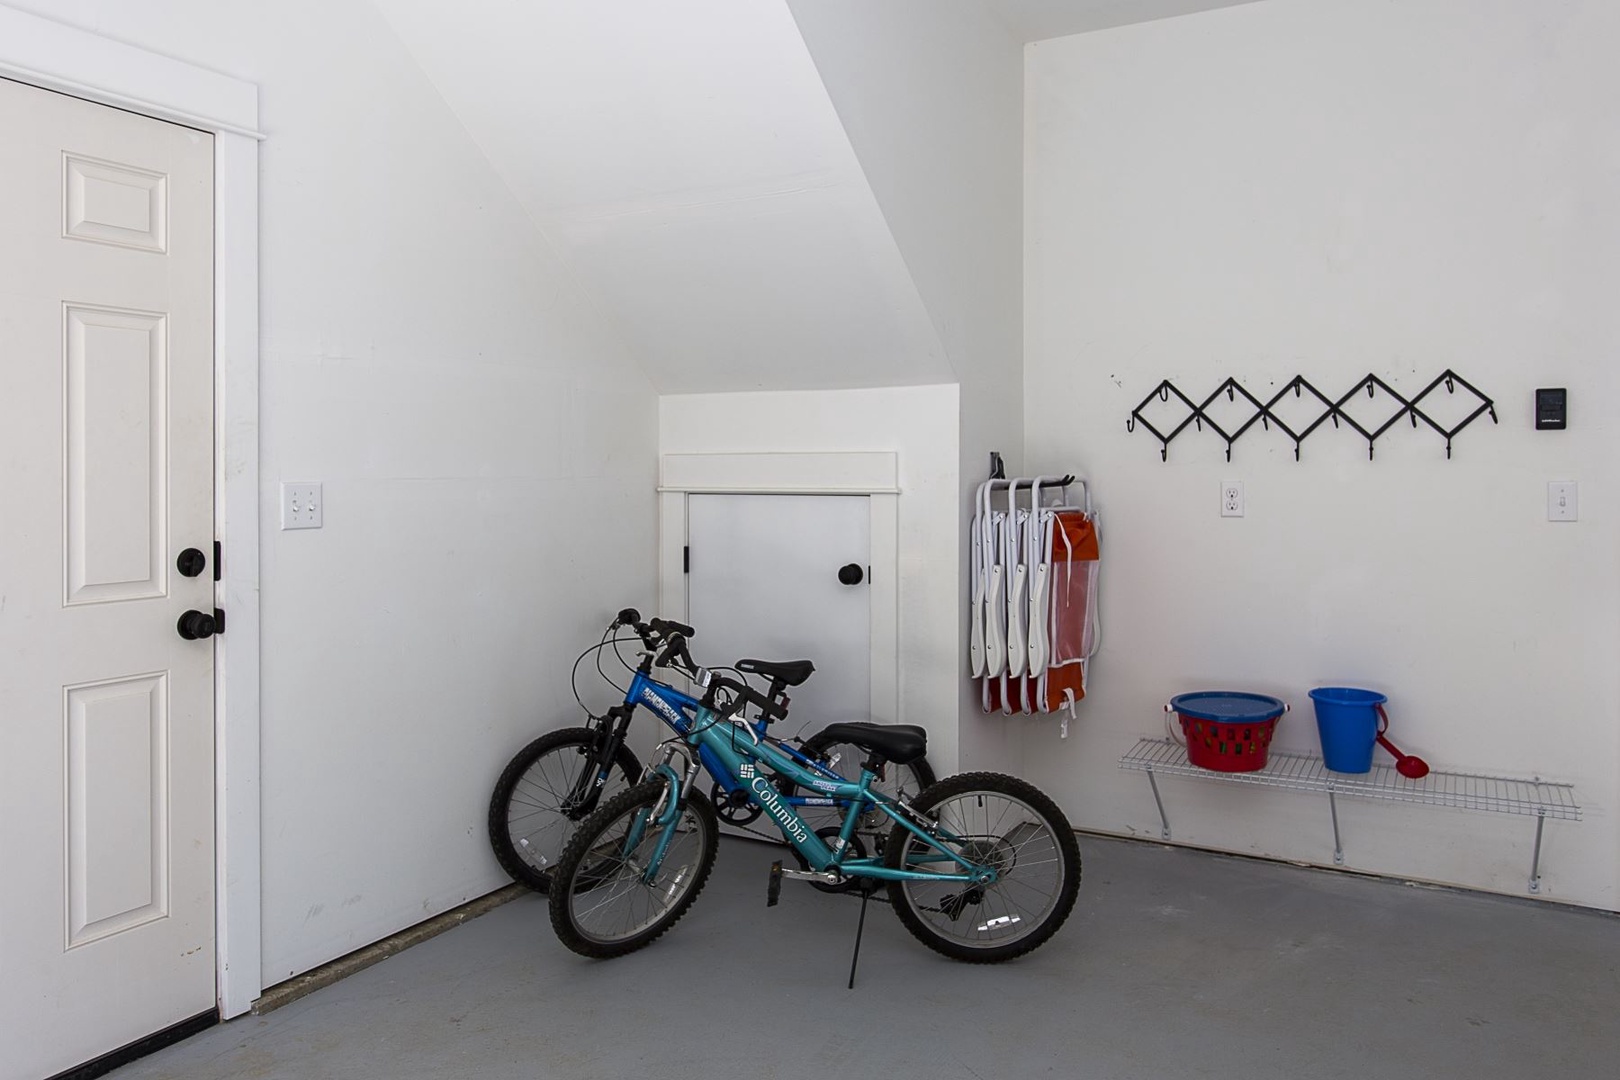 Garage with beach chairs, bikes, and sand castle toys